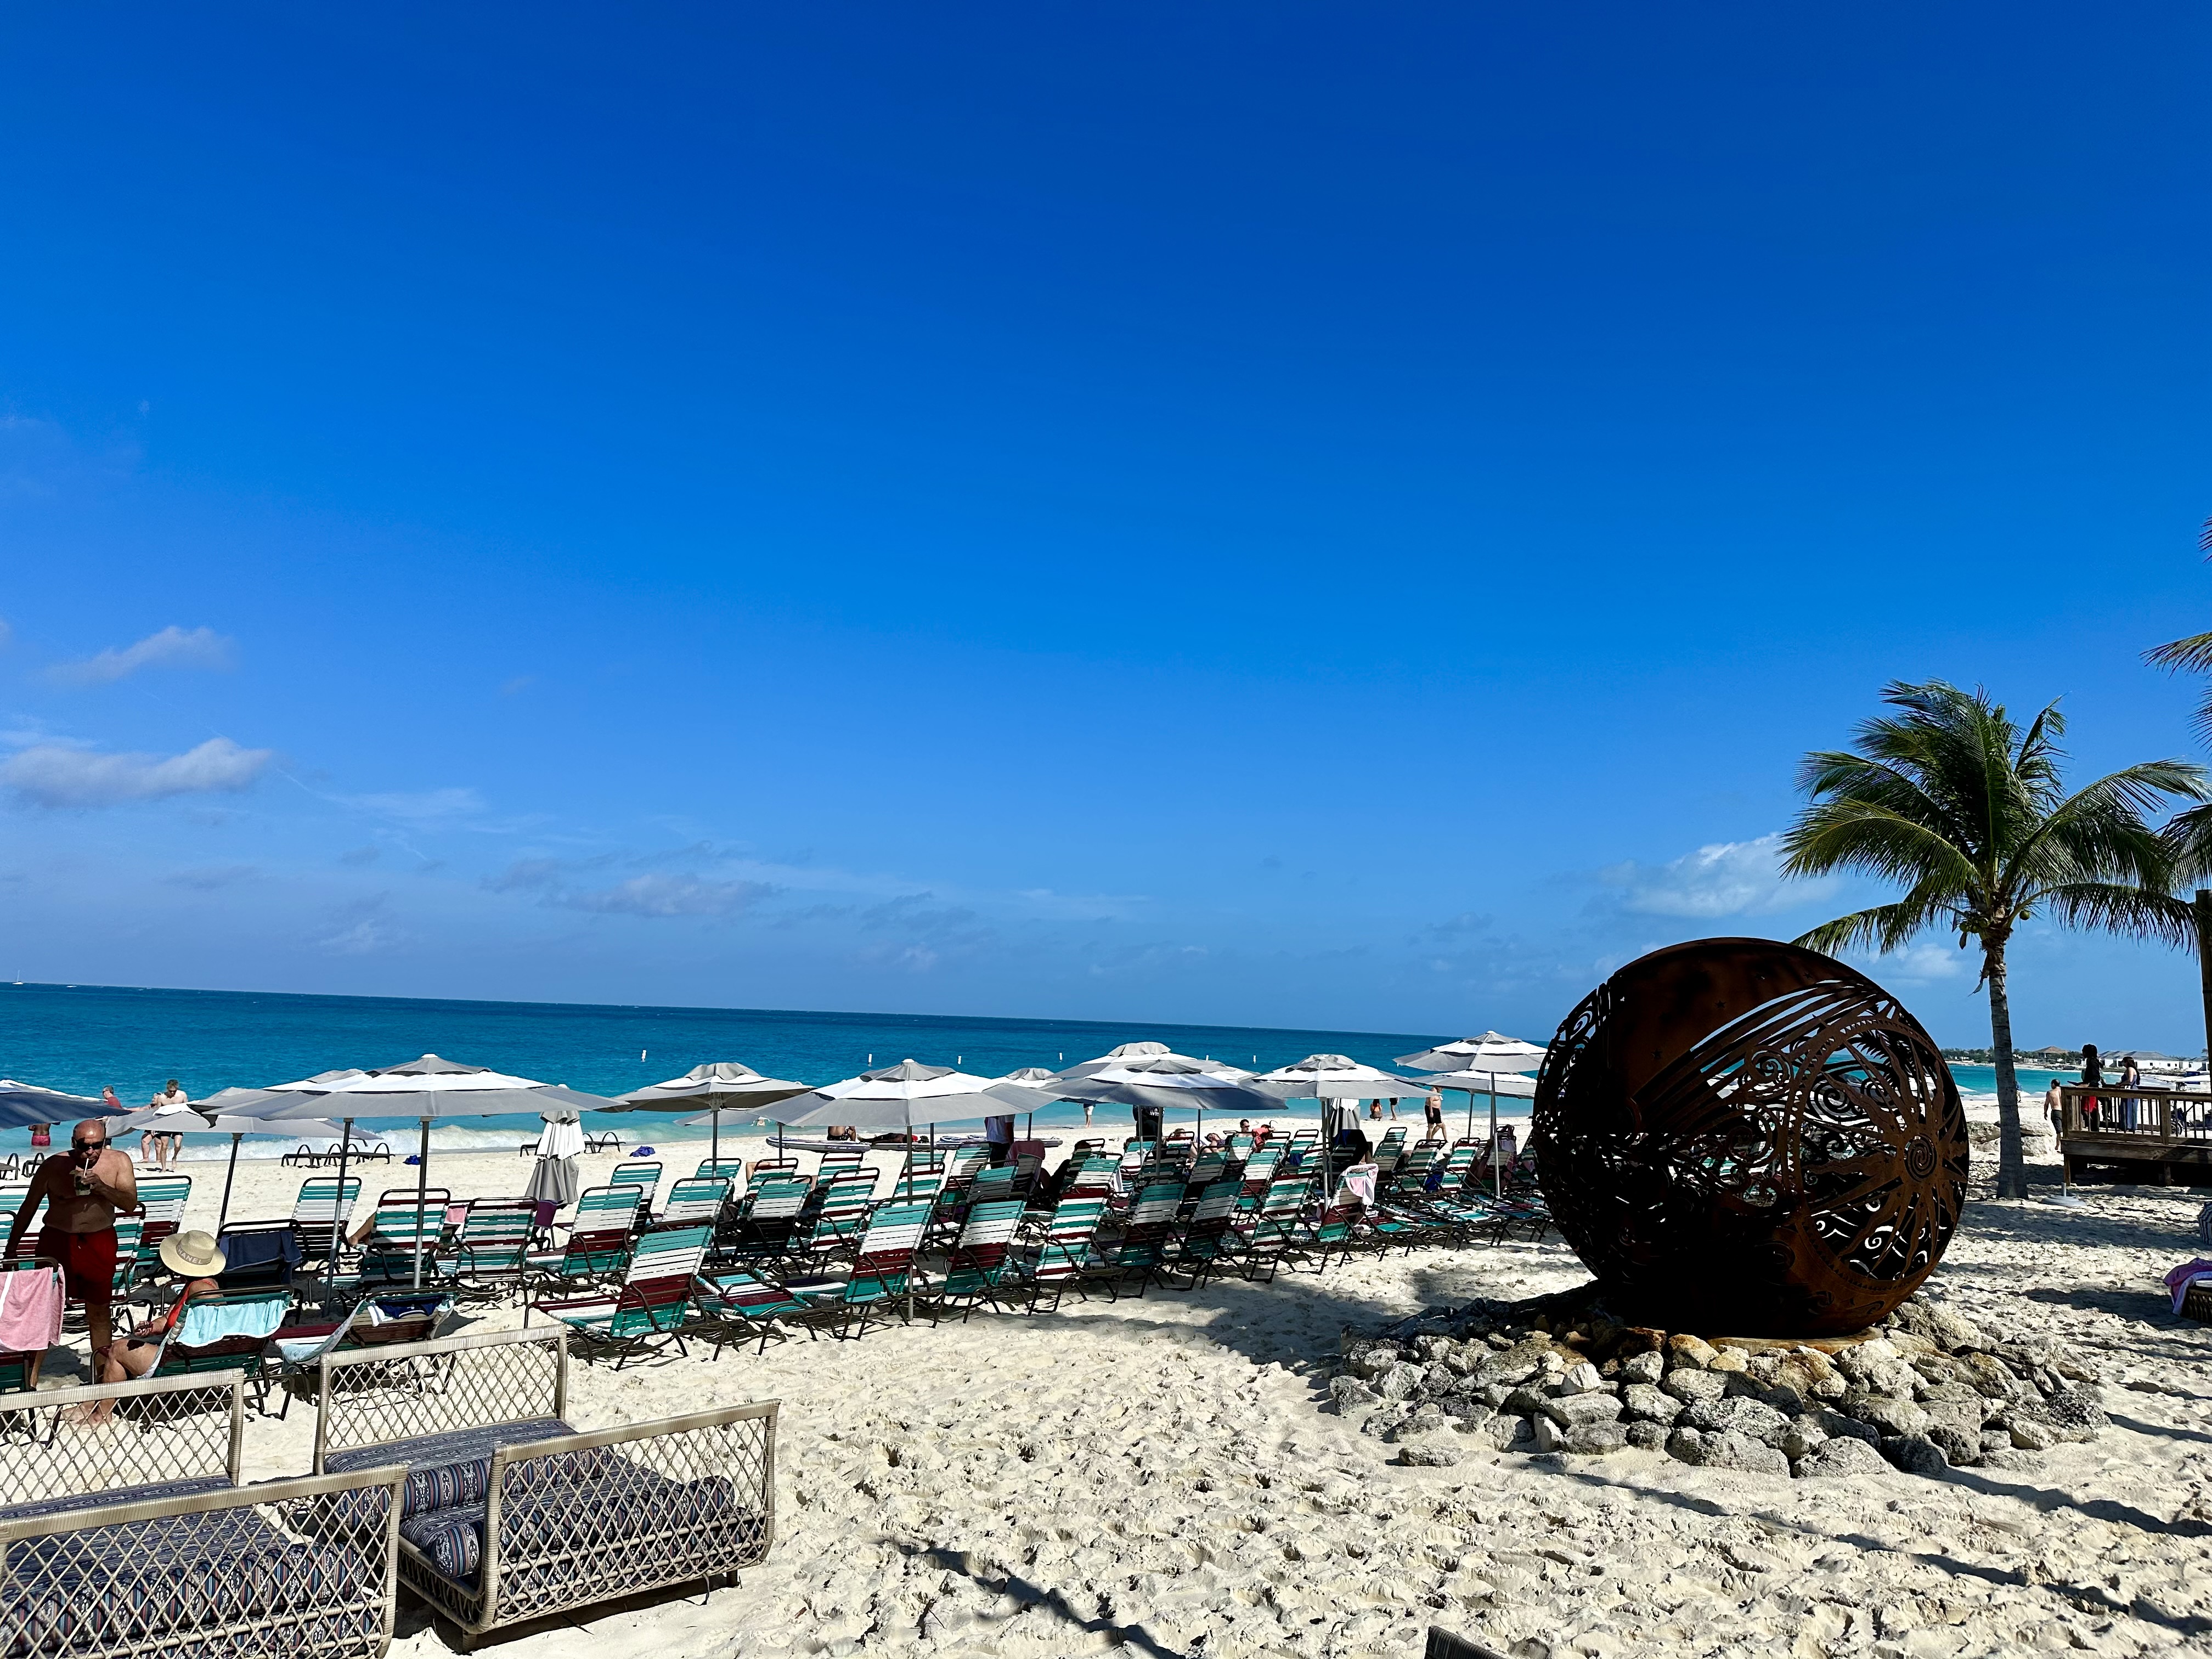 a beach with a large metal ball and palm trees